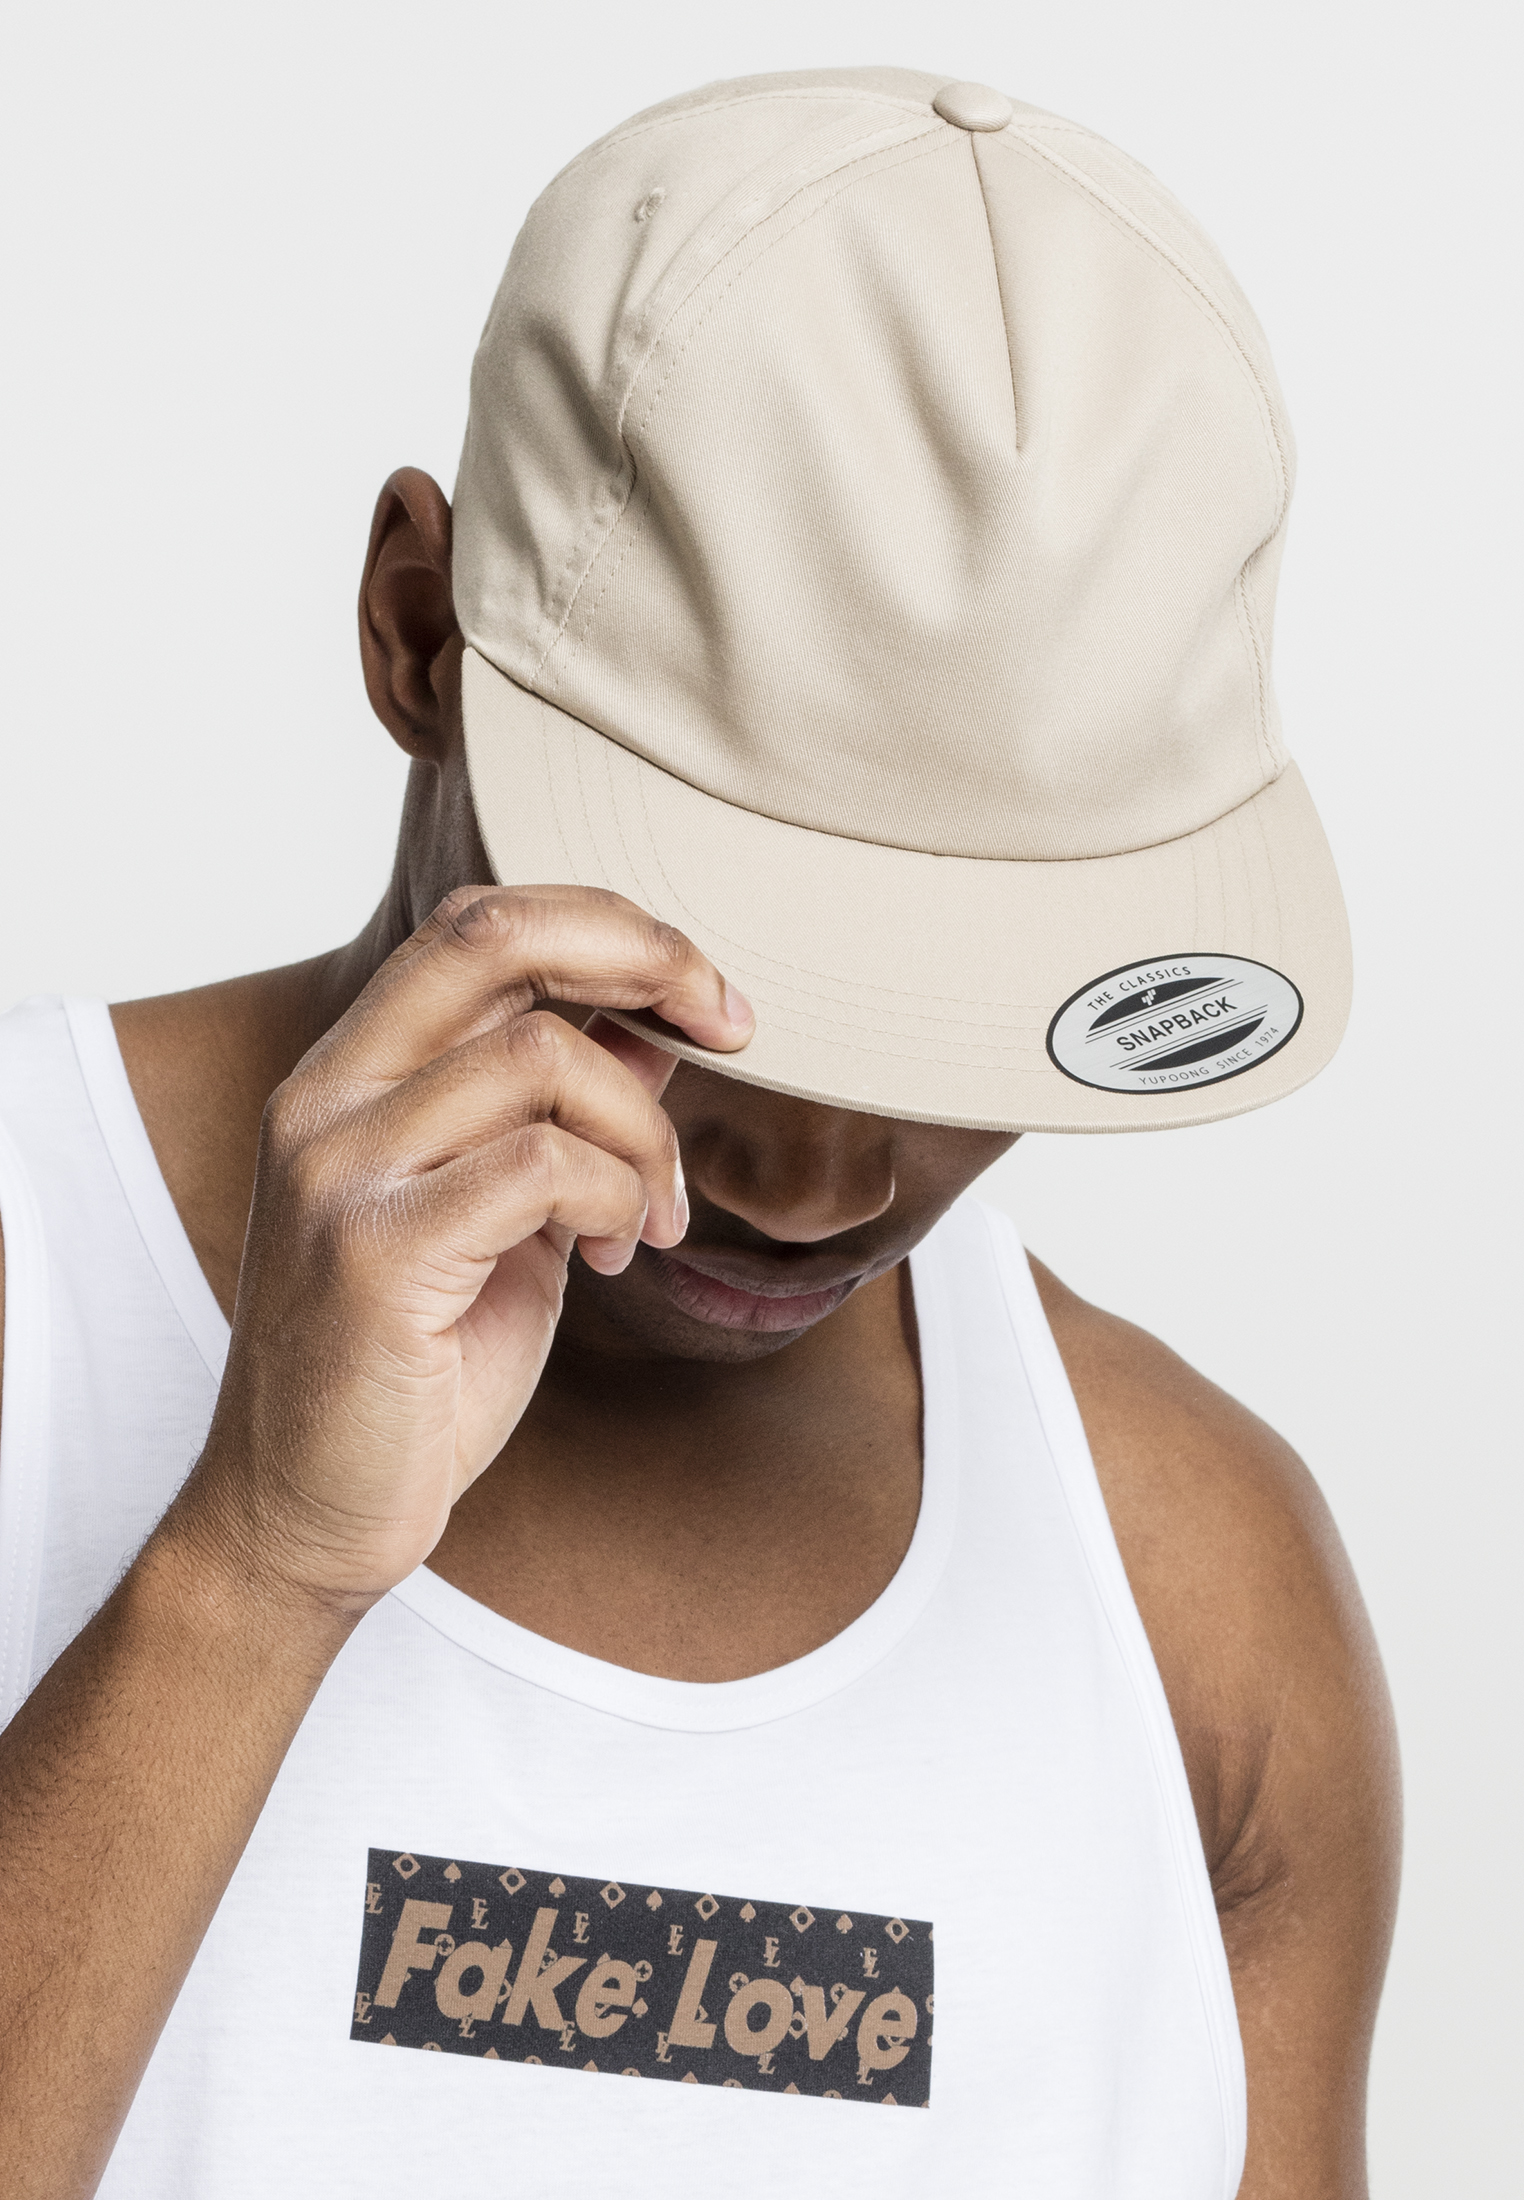 Snapback Unstructured 5-Panel Snapback in Farbe khaki